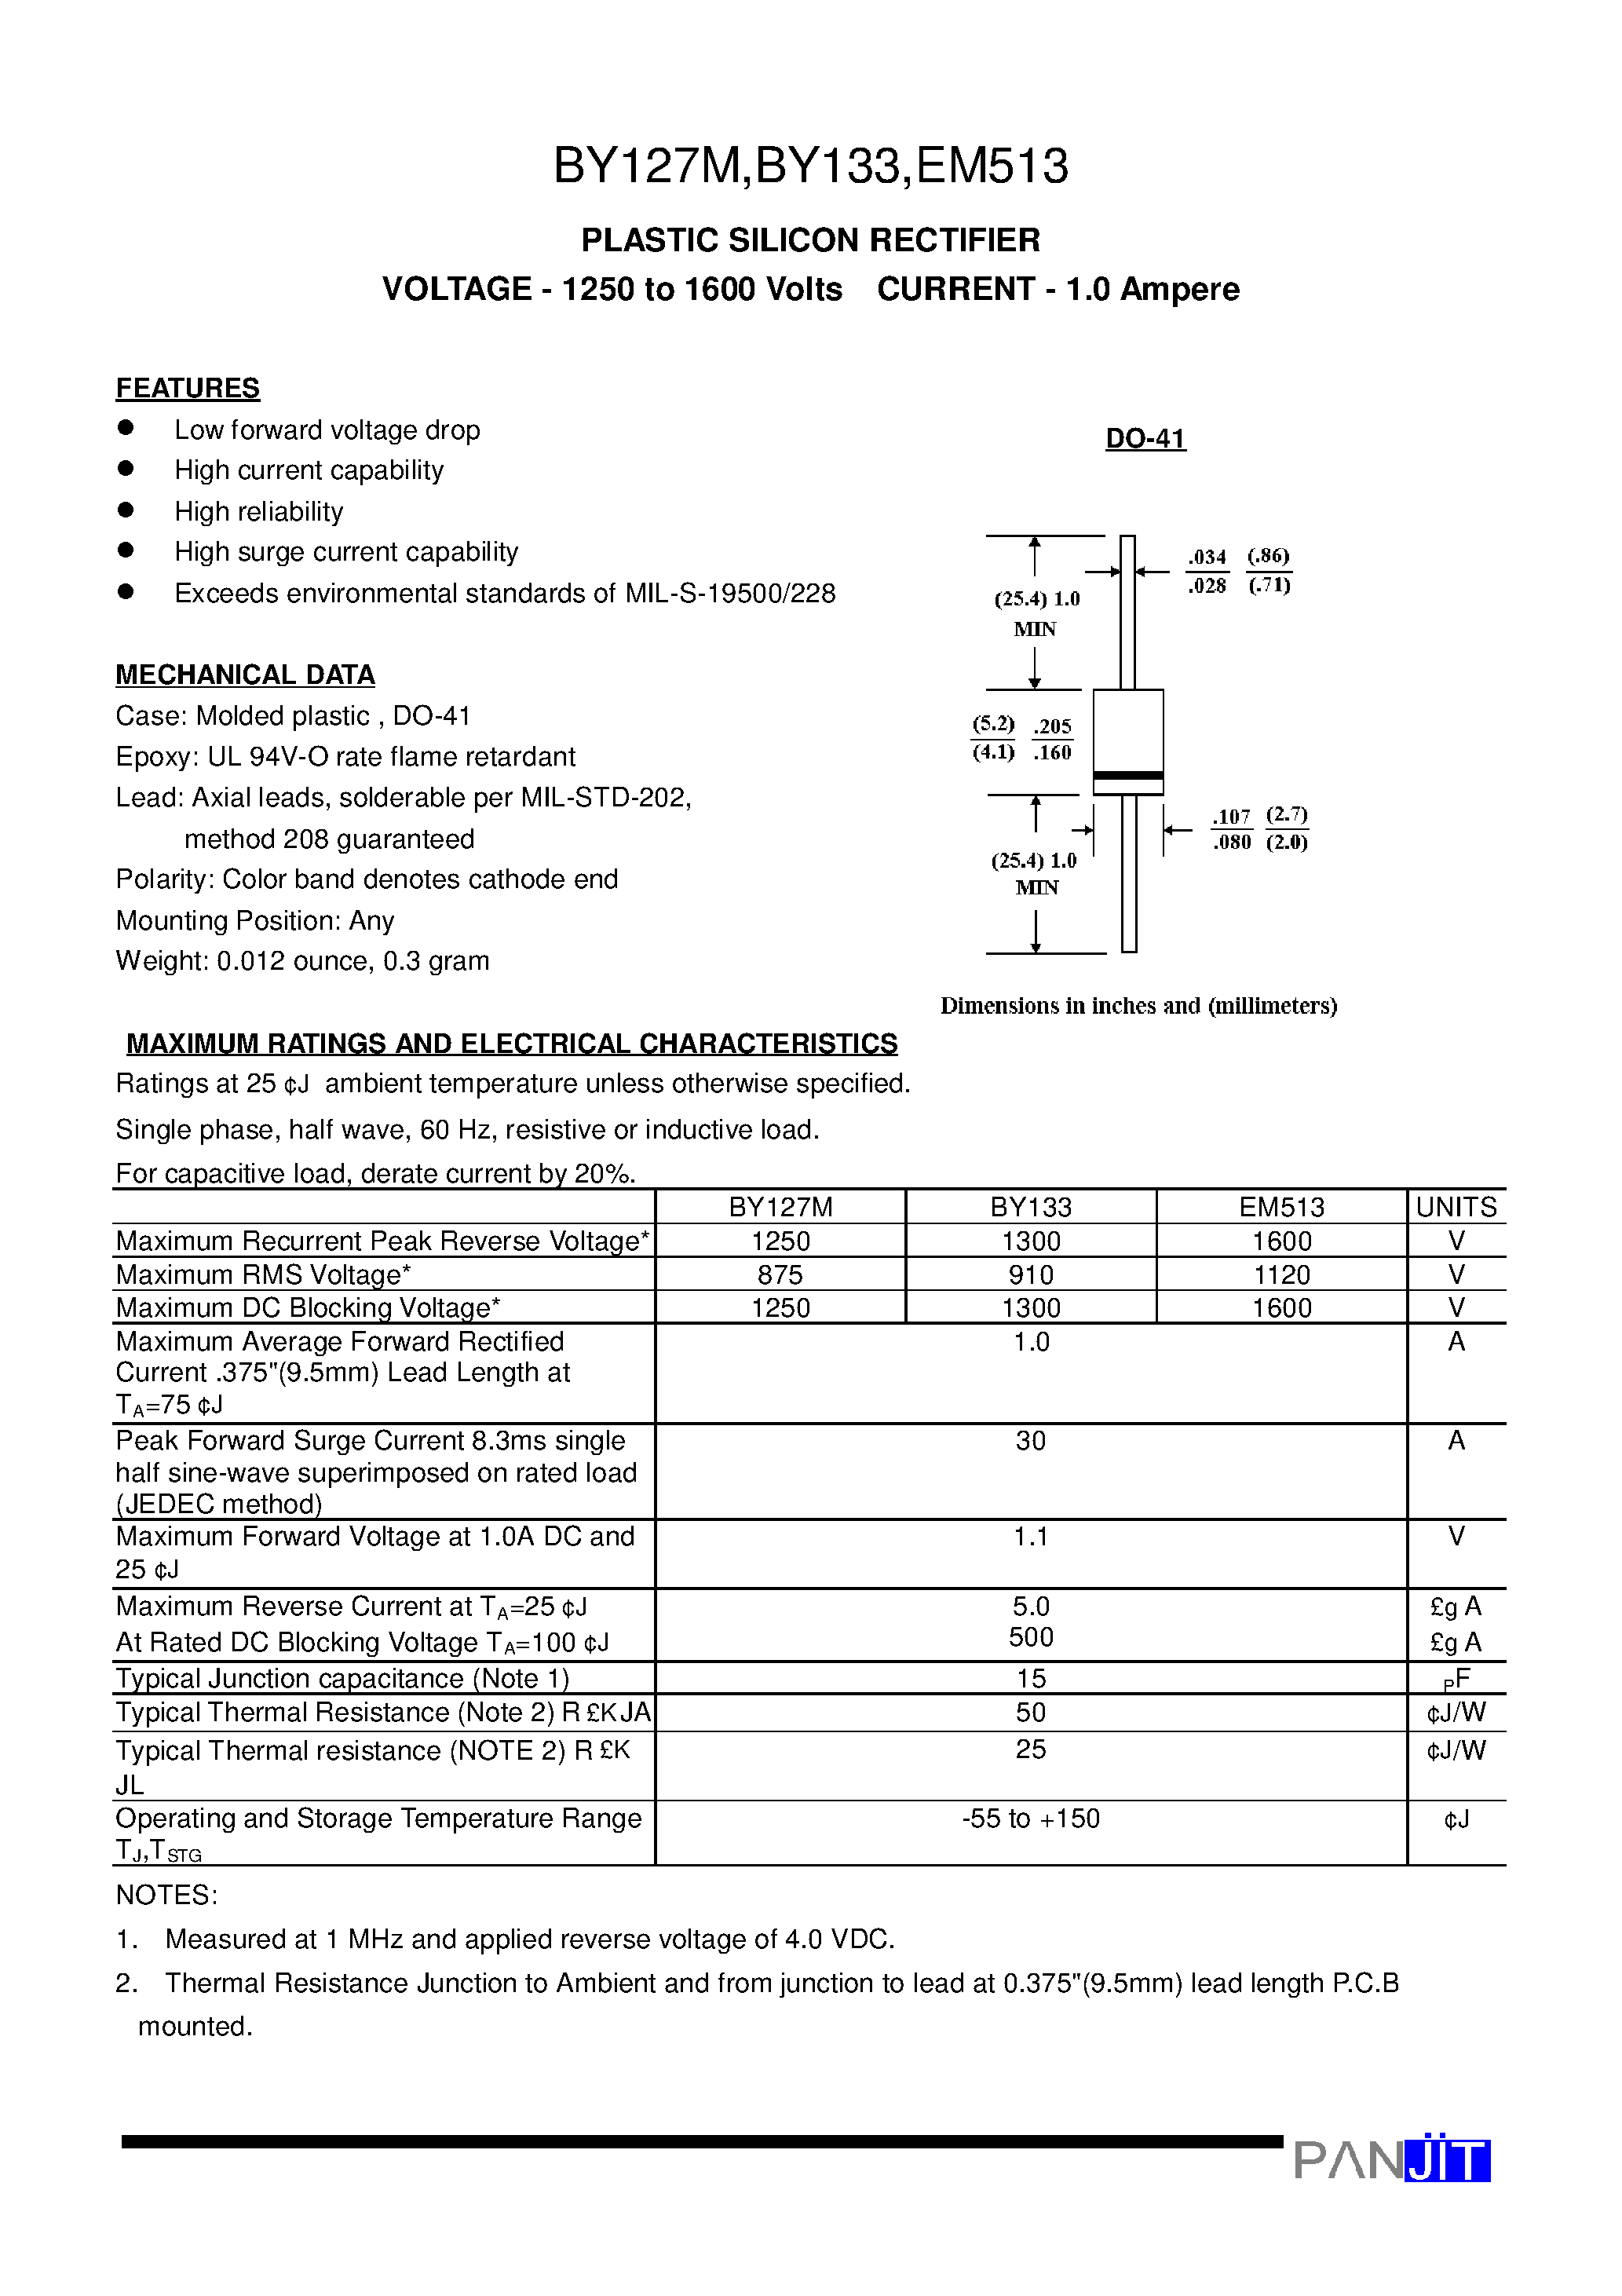 Datasheet BY127M - PLASTIC SILICON RECTIFIER(VOLTAGE - 1250 to 1600 Volts CURRENT - 1.0 Ampere) page 1